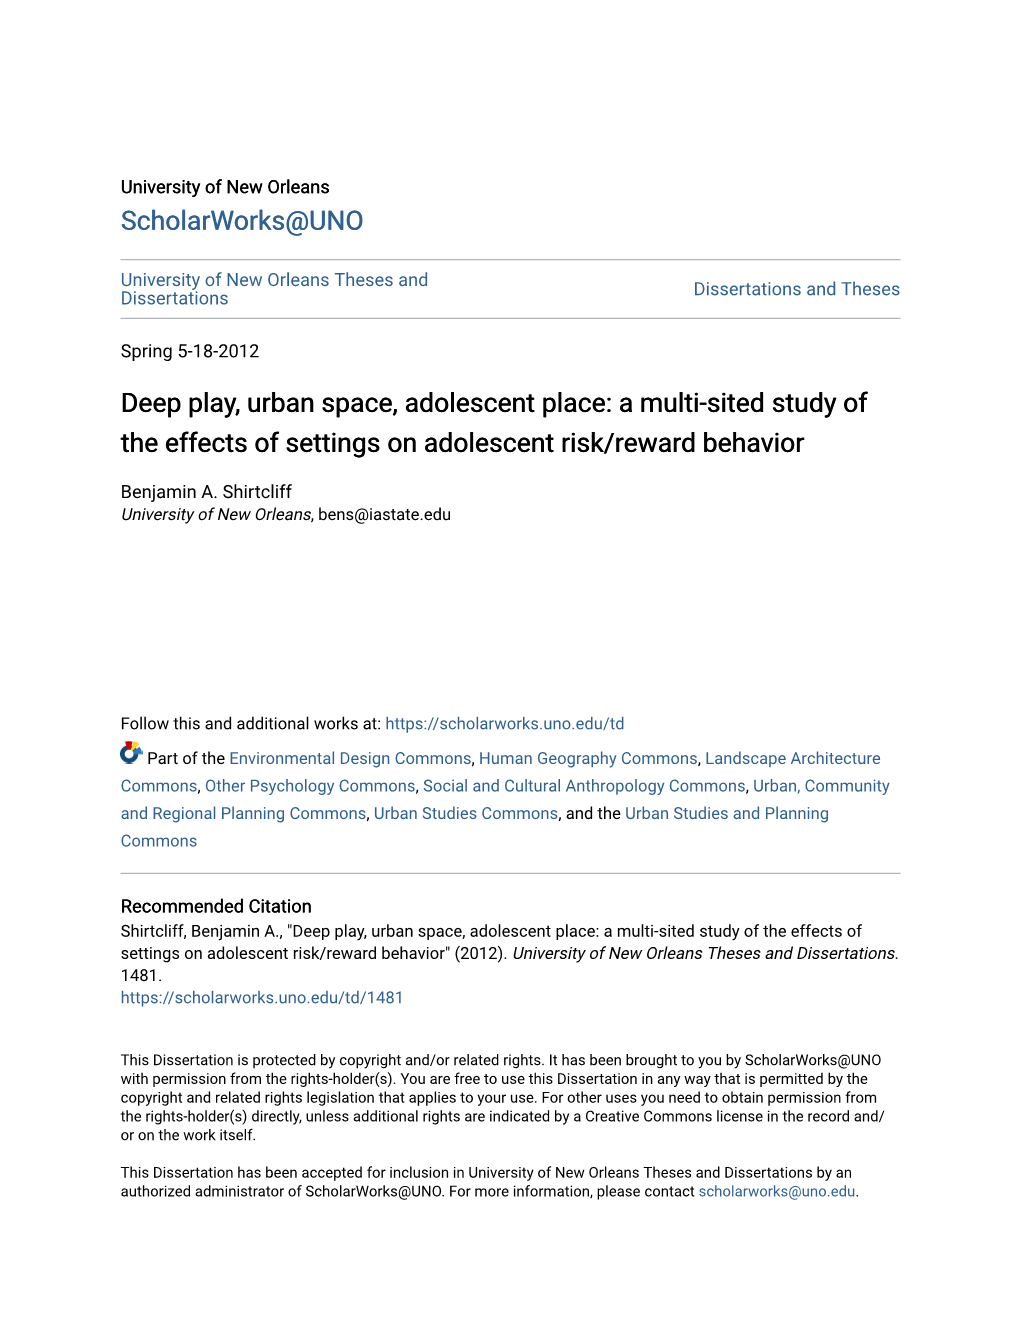 Deep Play, Urban Space, Adolescent Place: a Multi-Sited Study of the Effects of Settings on Adolescent Risk/Reward Behavior